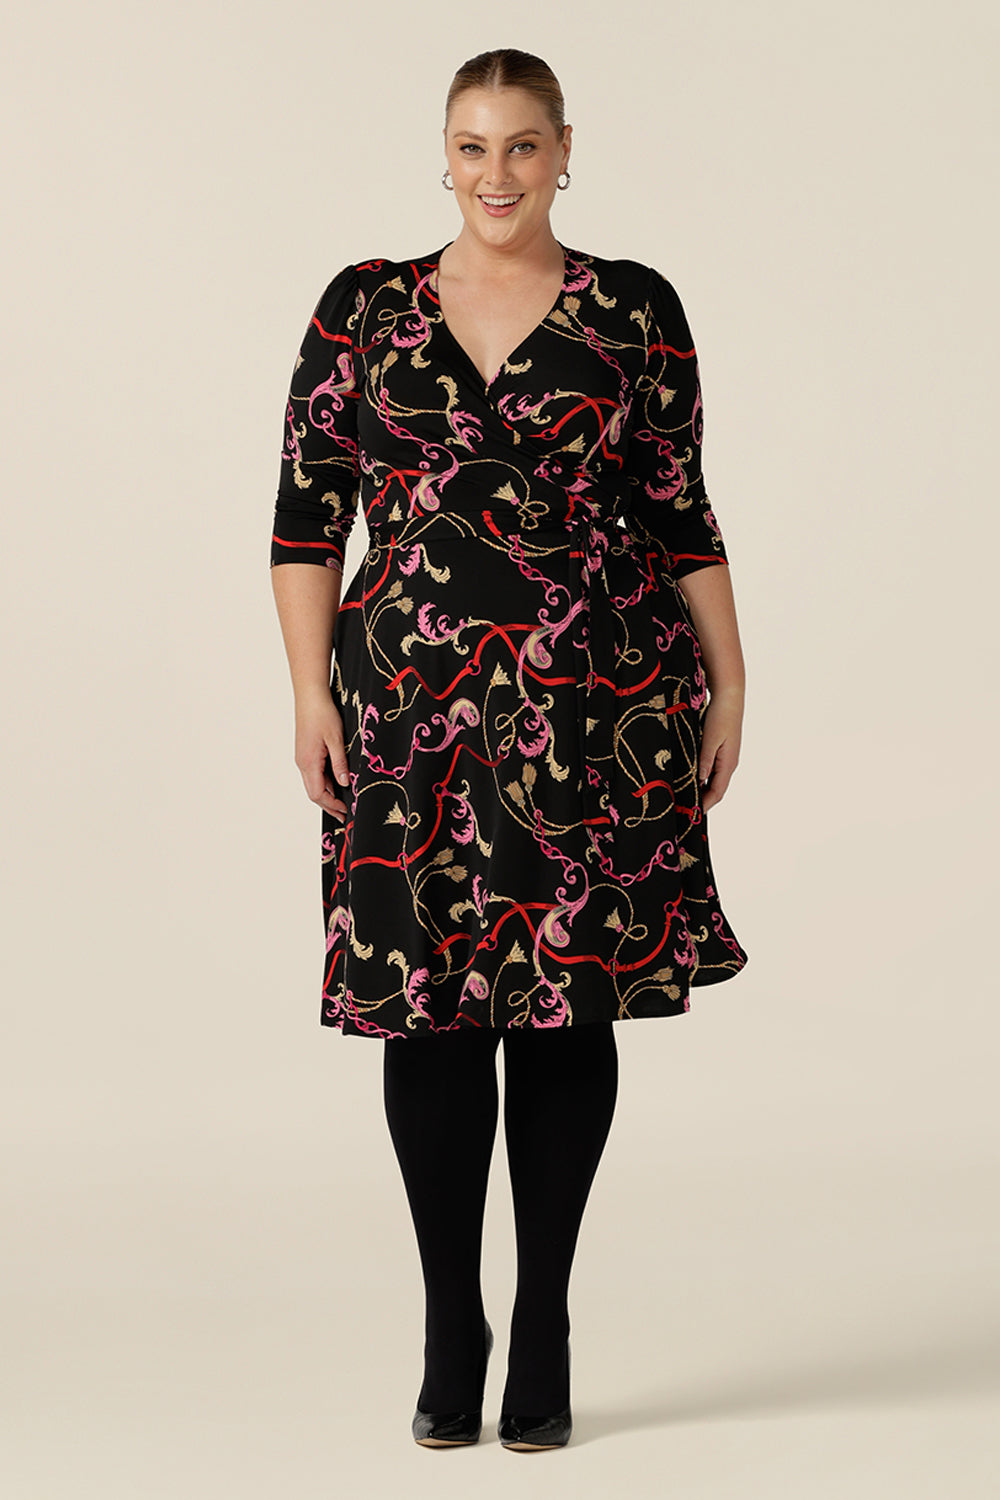 A knee length wrap dress in rococo print jersey looks sassy for work and as a going out dress. Shown for plus sizes, this 3/4 sleeve wrap dress is made in Australia in dress sizes 8 to 24.